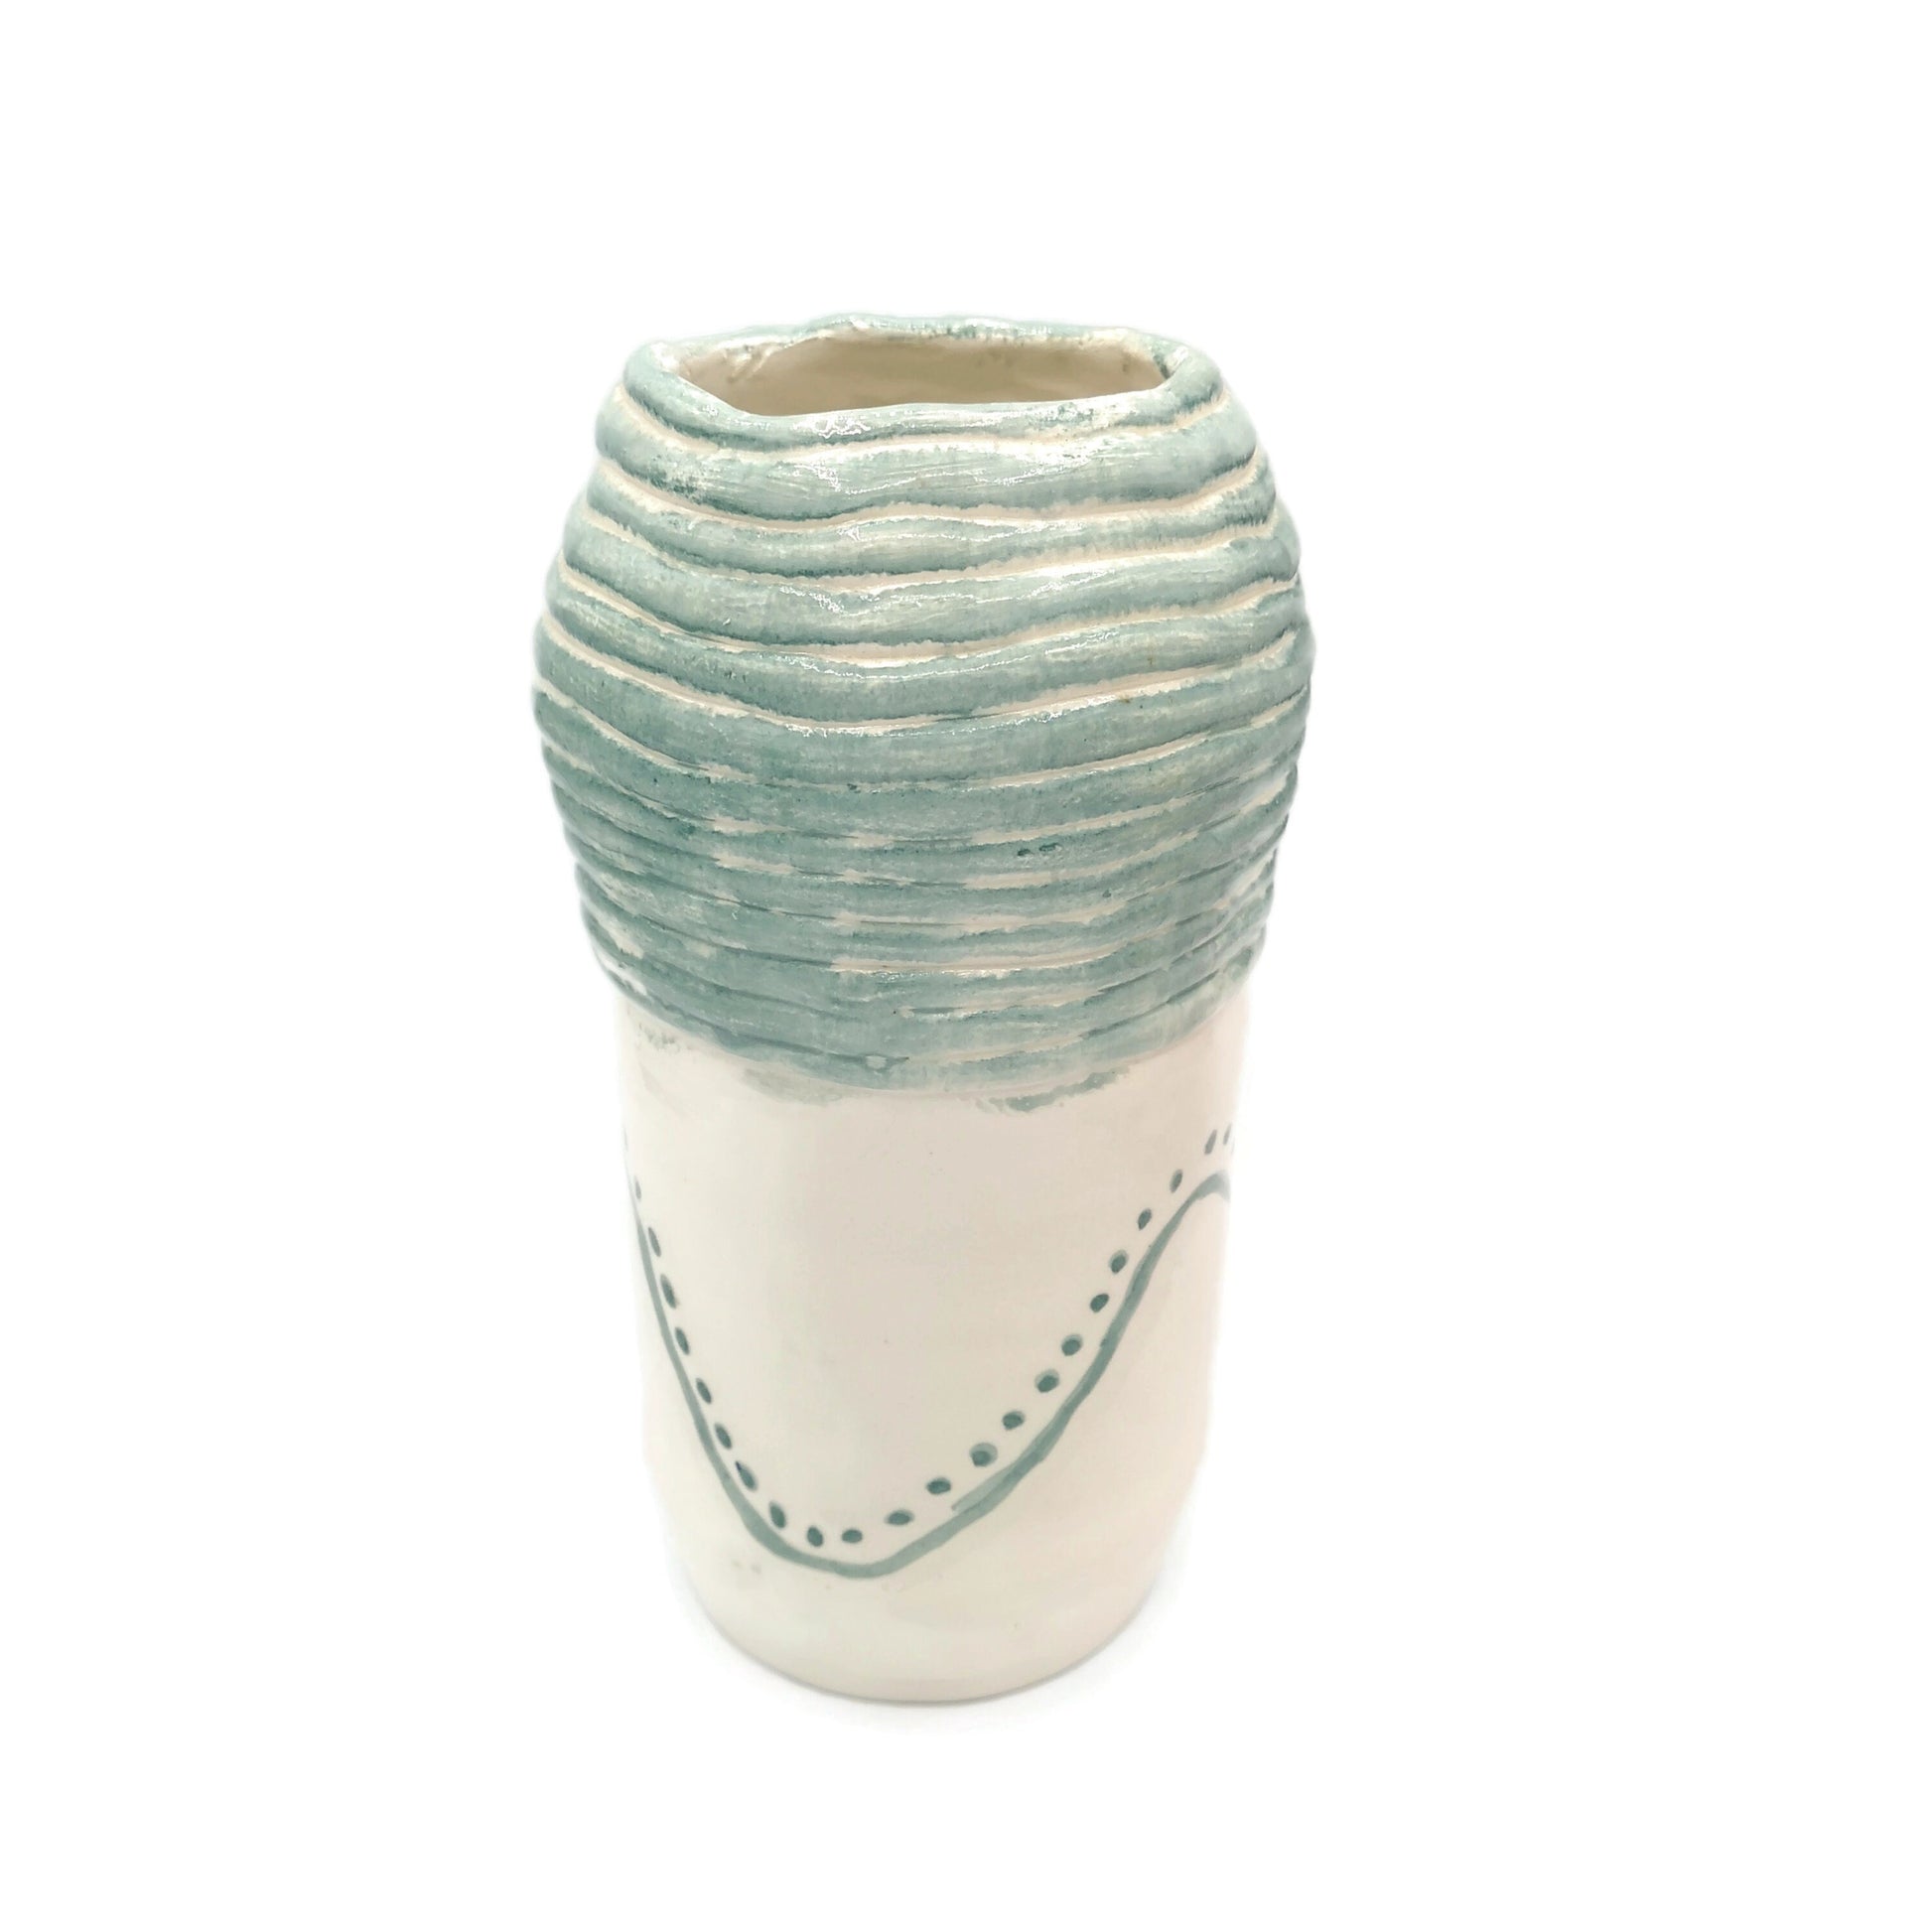 Handmade Ceramic Vase Hand Painted Sage Green Pottery For Home Decor, Portuguese Tall Vase With Texture To Put Fresh Flowers - Ceramica Ana Rafael